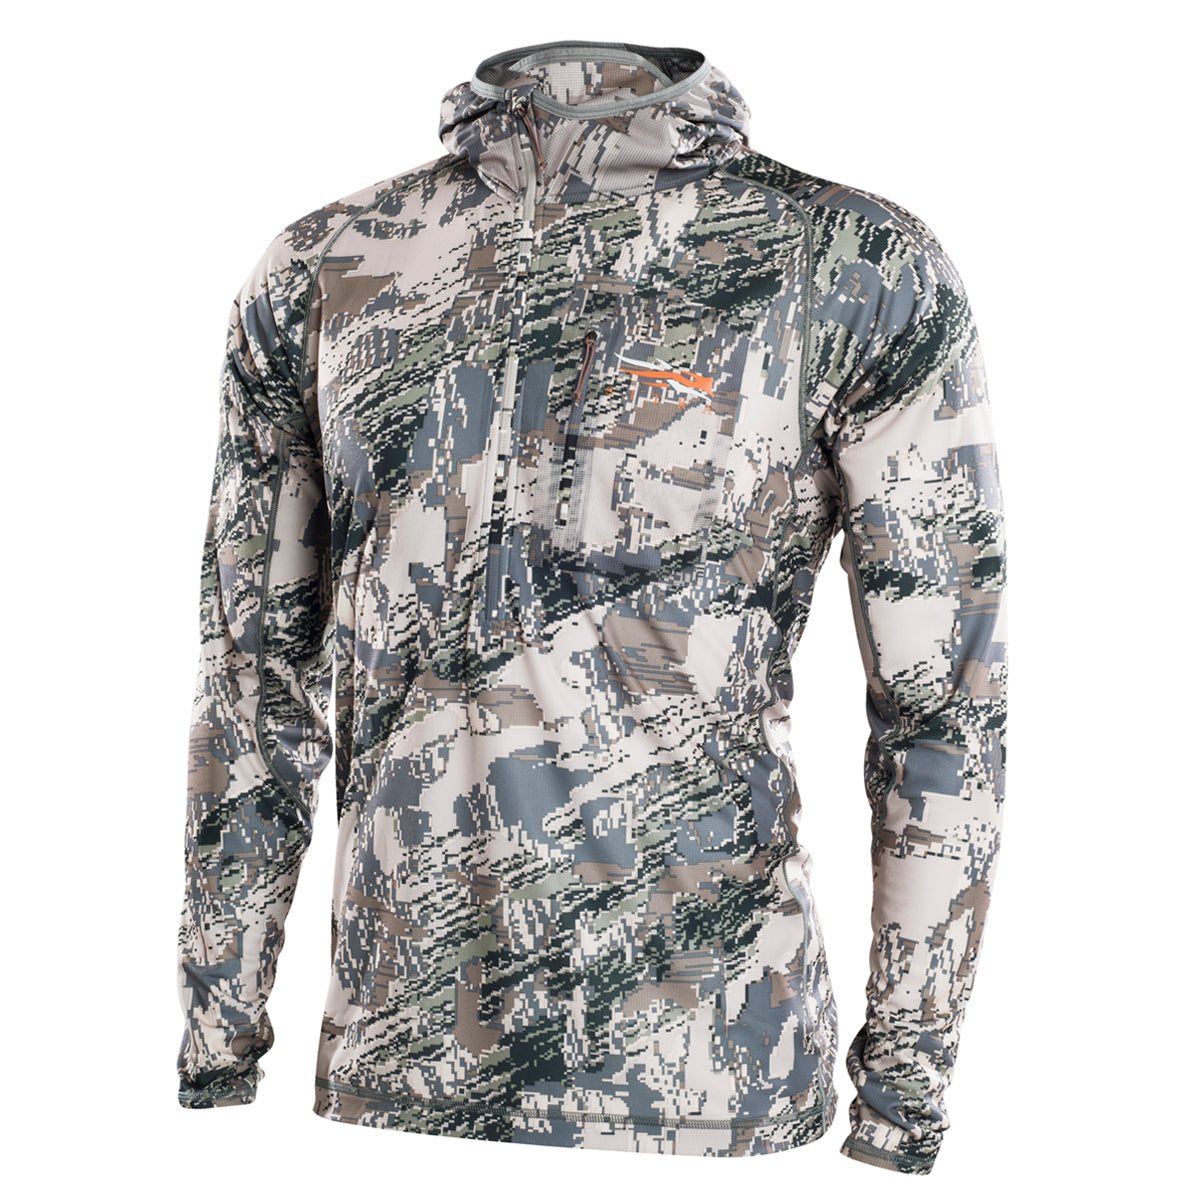 Sitka Core Lightweight Hoody in Sitka Core Lightweight Hoody by Sitka | Apparel - goHUNT Shop by GOHUNT | Sitka - GOHUNT Shop